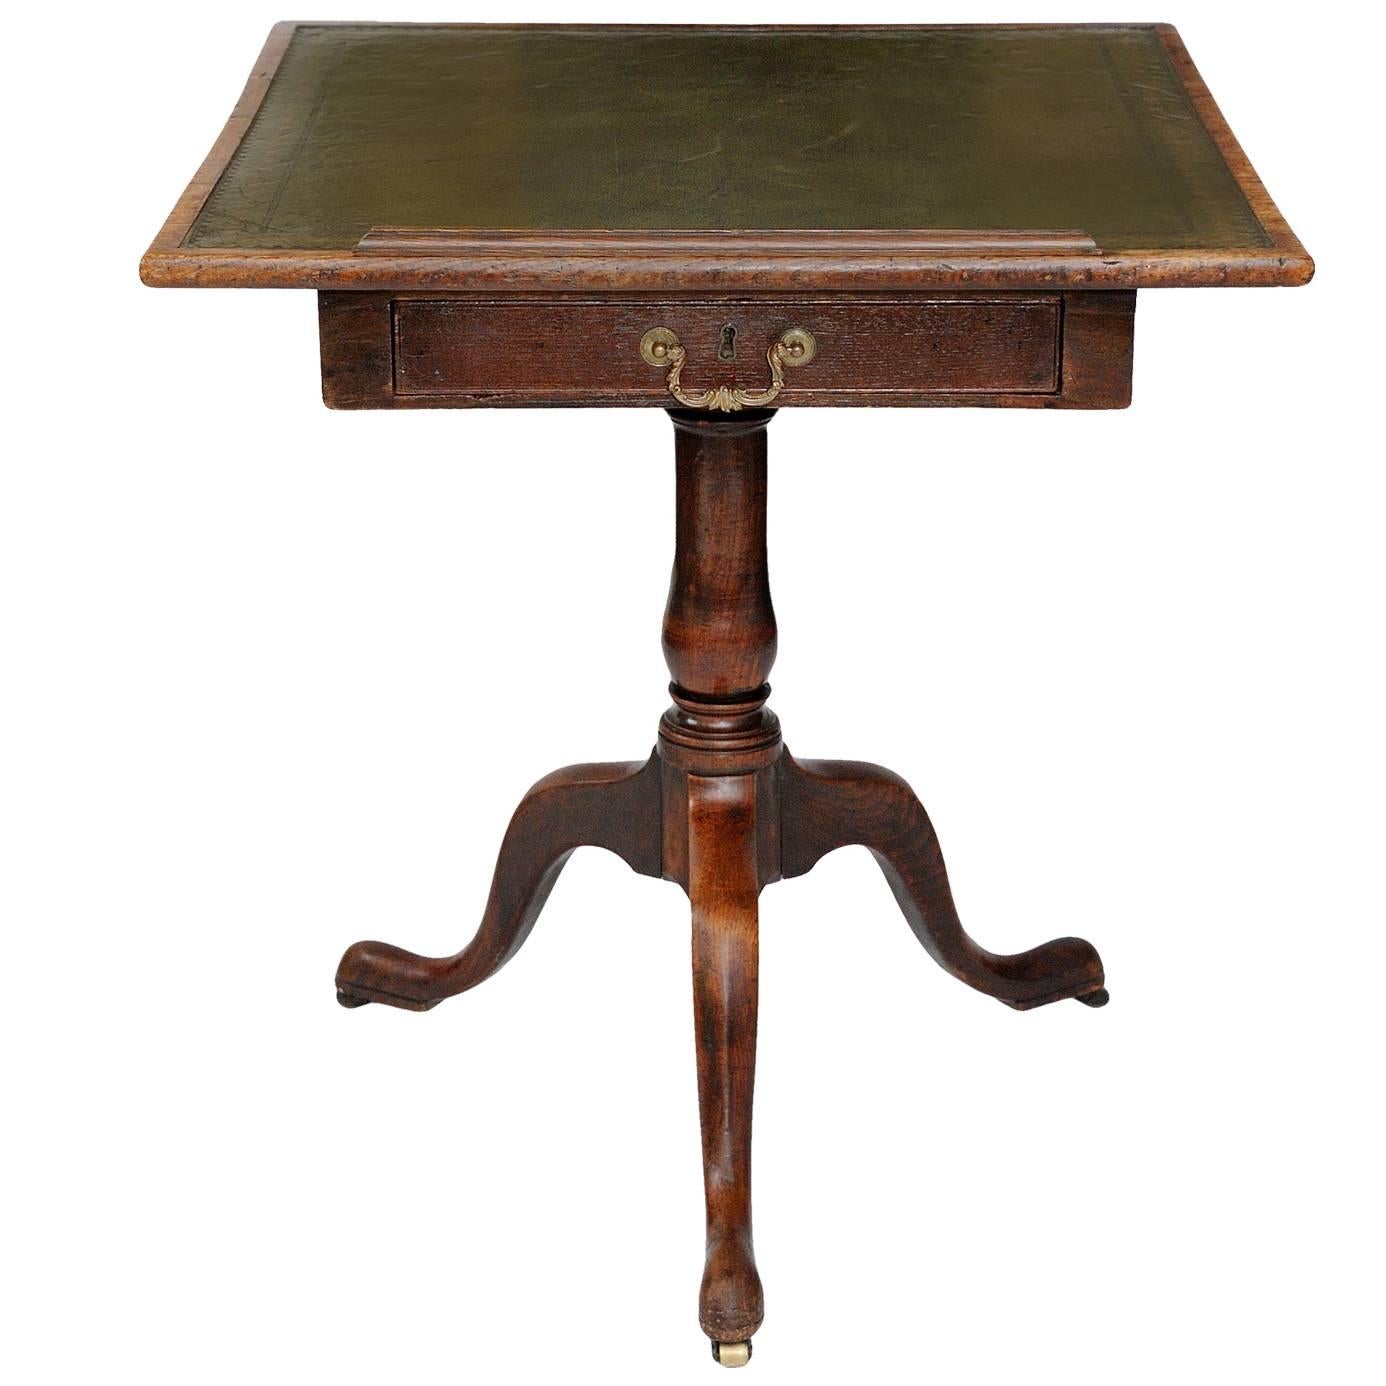 This is a rare and rather beautiful English George III Chippendale style 18th century metamorphic oak reading/architects table with adjustable tooled leather top.

The table consisting of a rising leather tooled top, capable of locking at